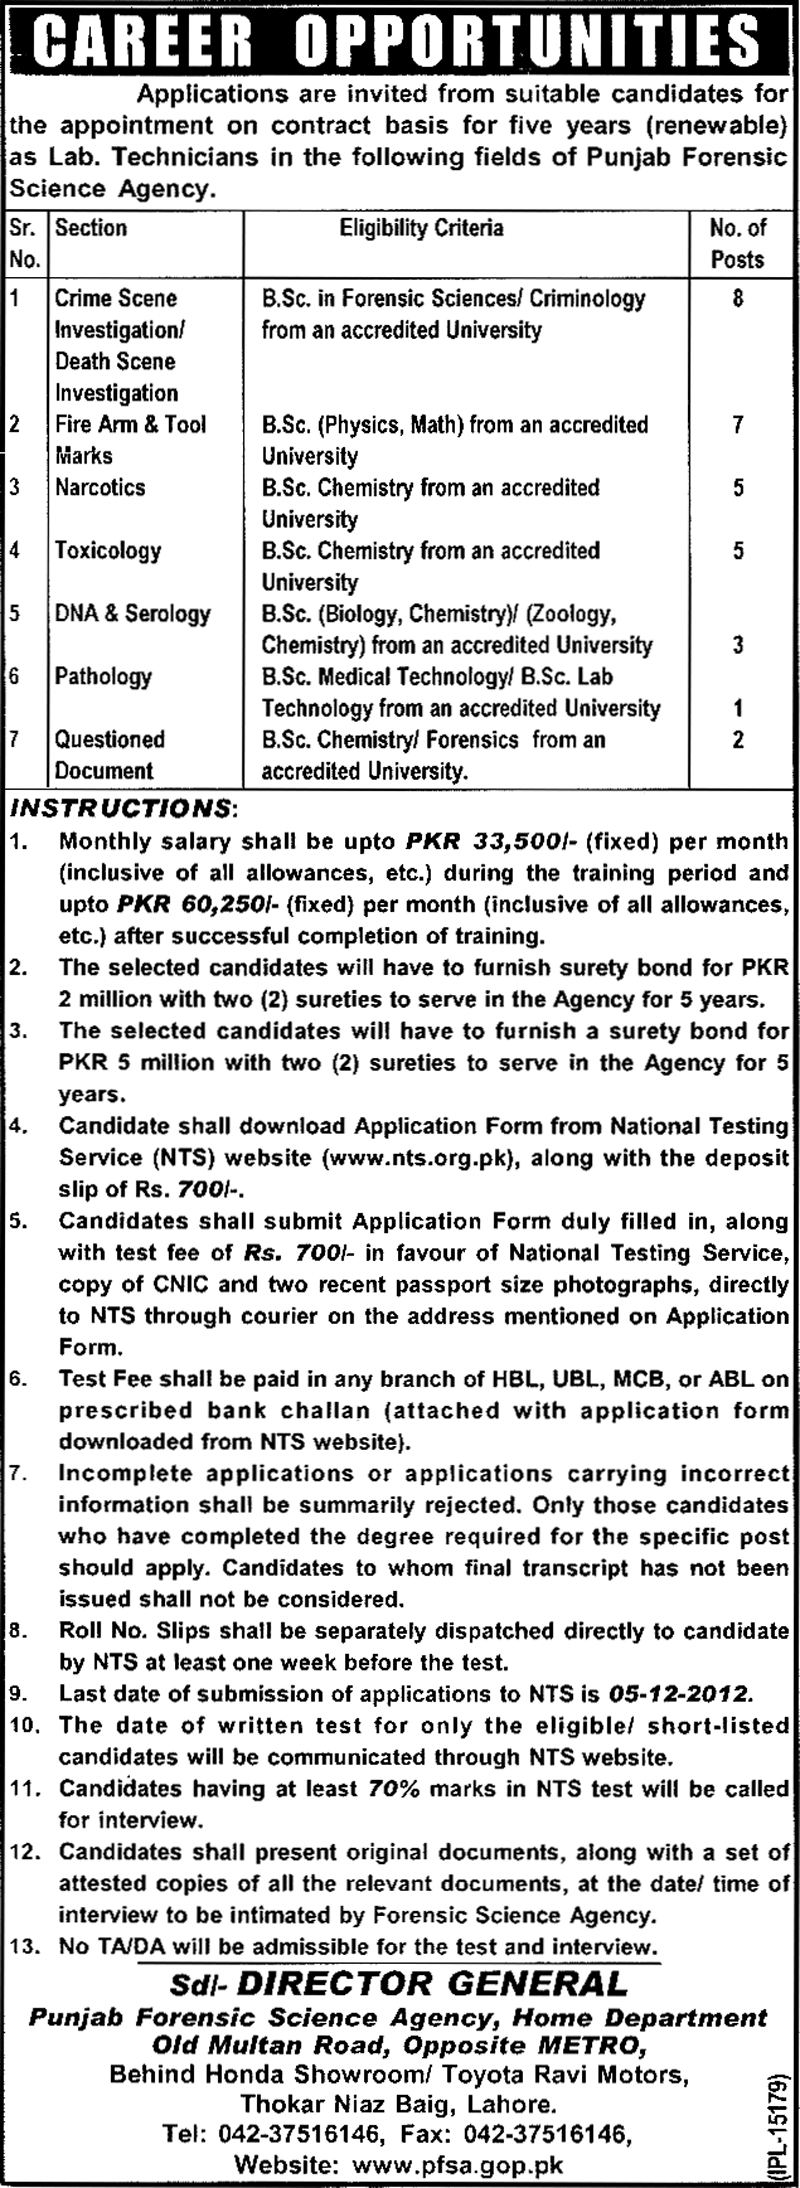 Punjab Forensic Science Agency (PFSA) Jobs for Lab Technicians